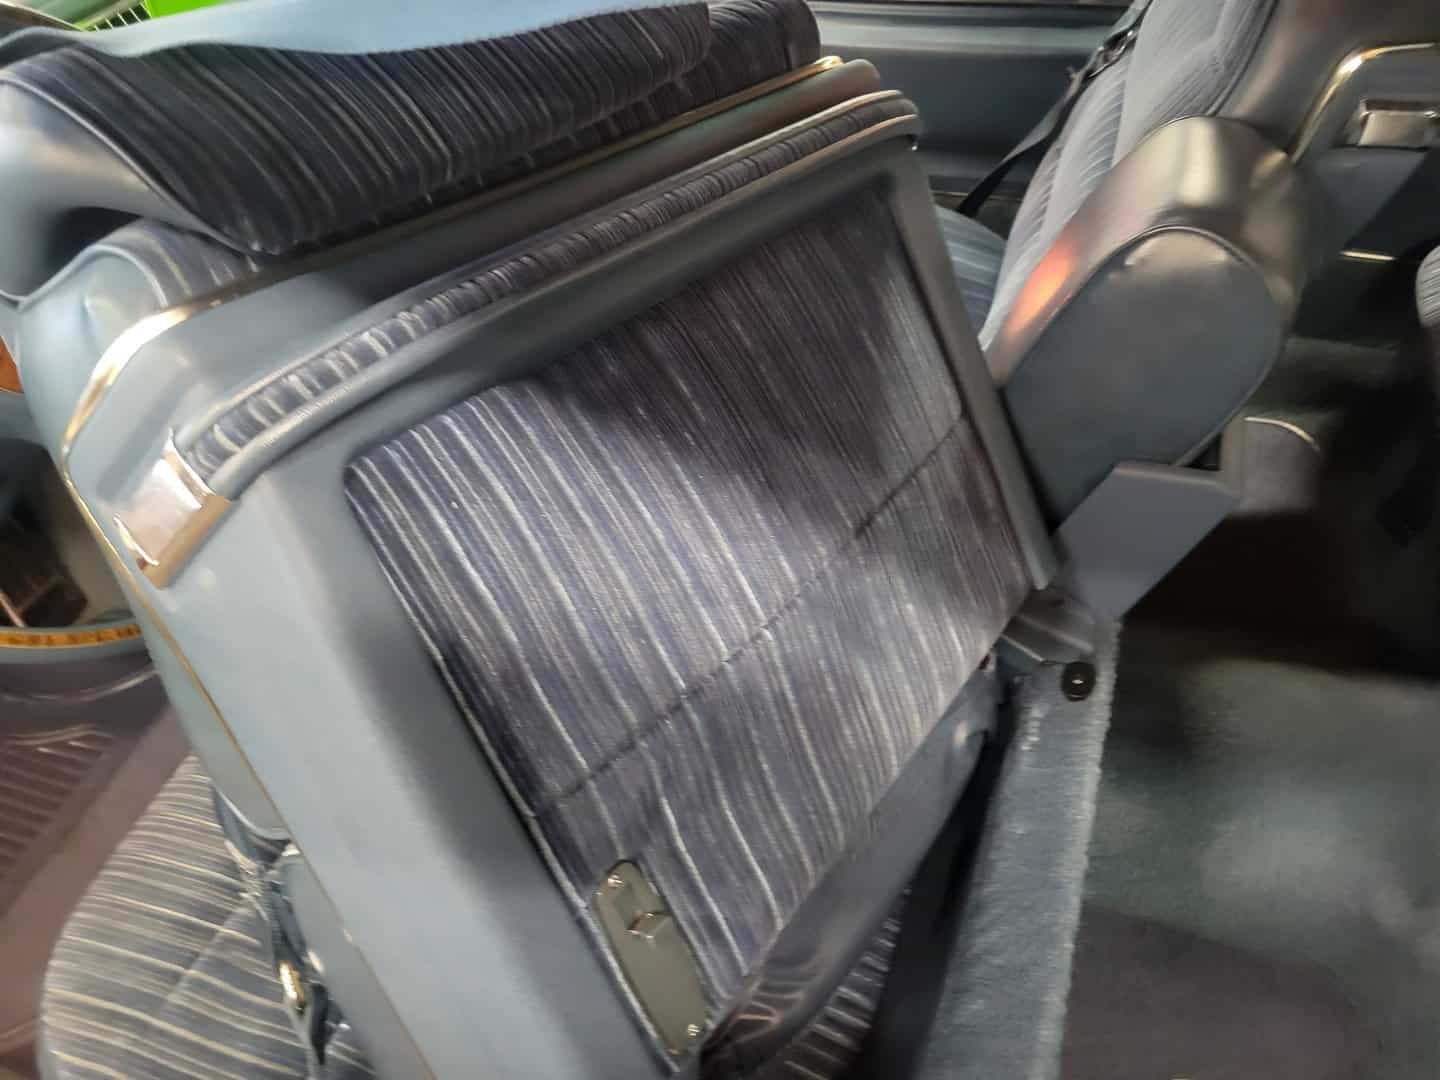 The Back Seat Of A 1976 Cadillac Coupe Deville With A Seat Belt.